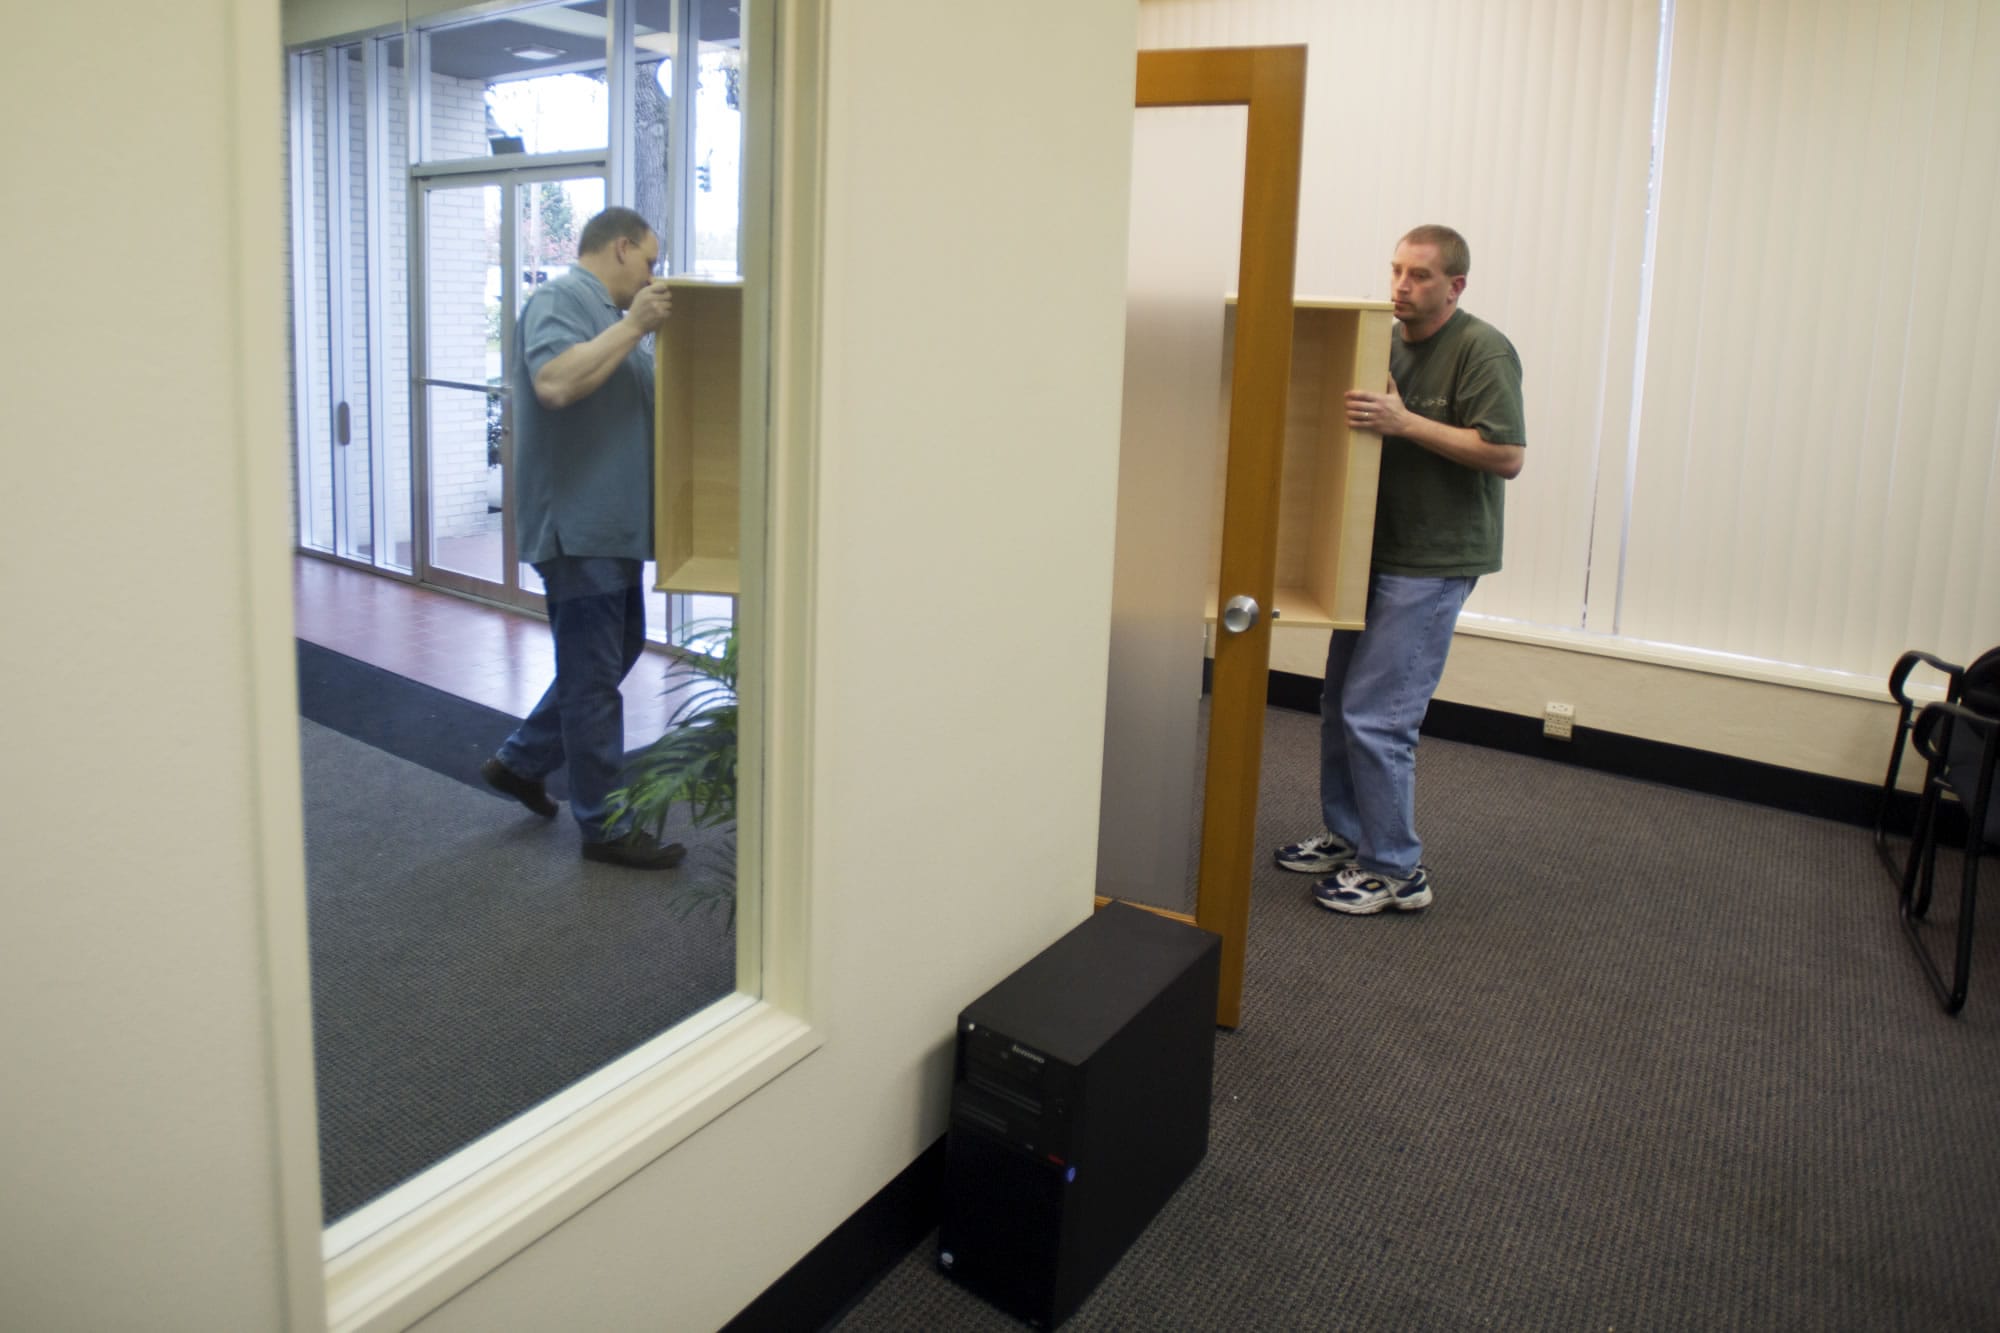 ITPro general manager Bob Berry, left, and tech manager Terry Meisner move furniture into the company's new office Monday.